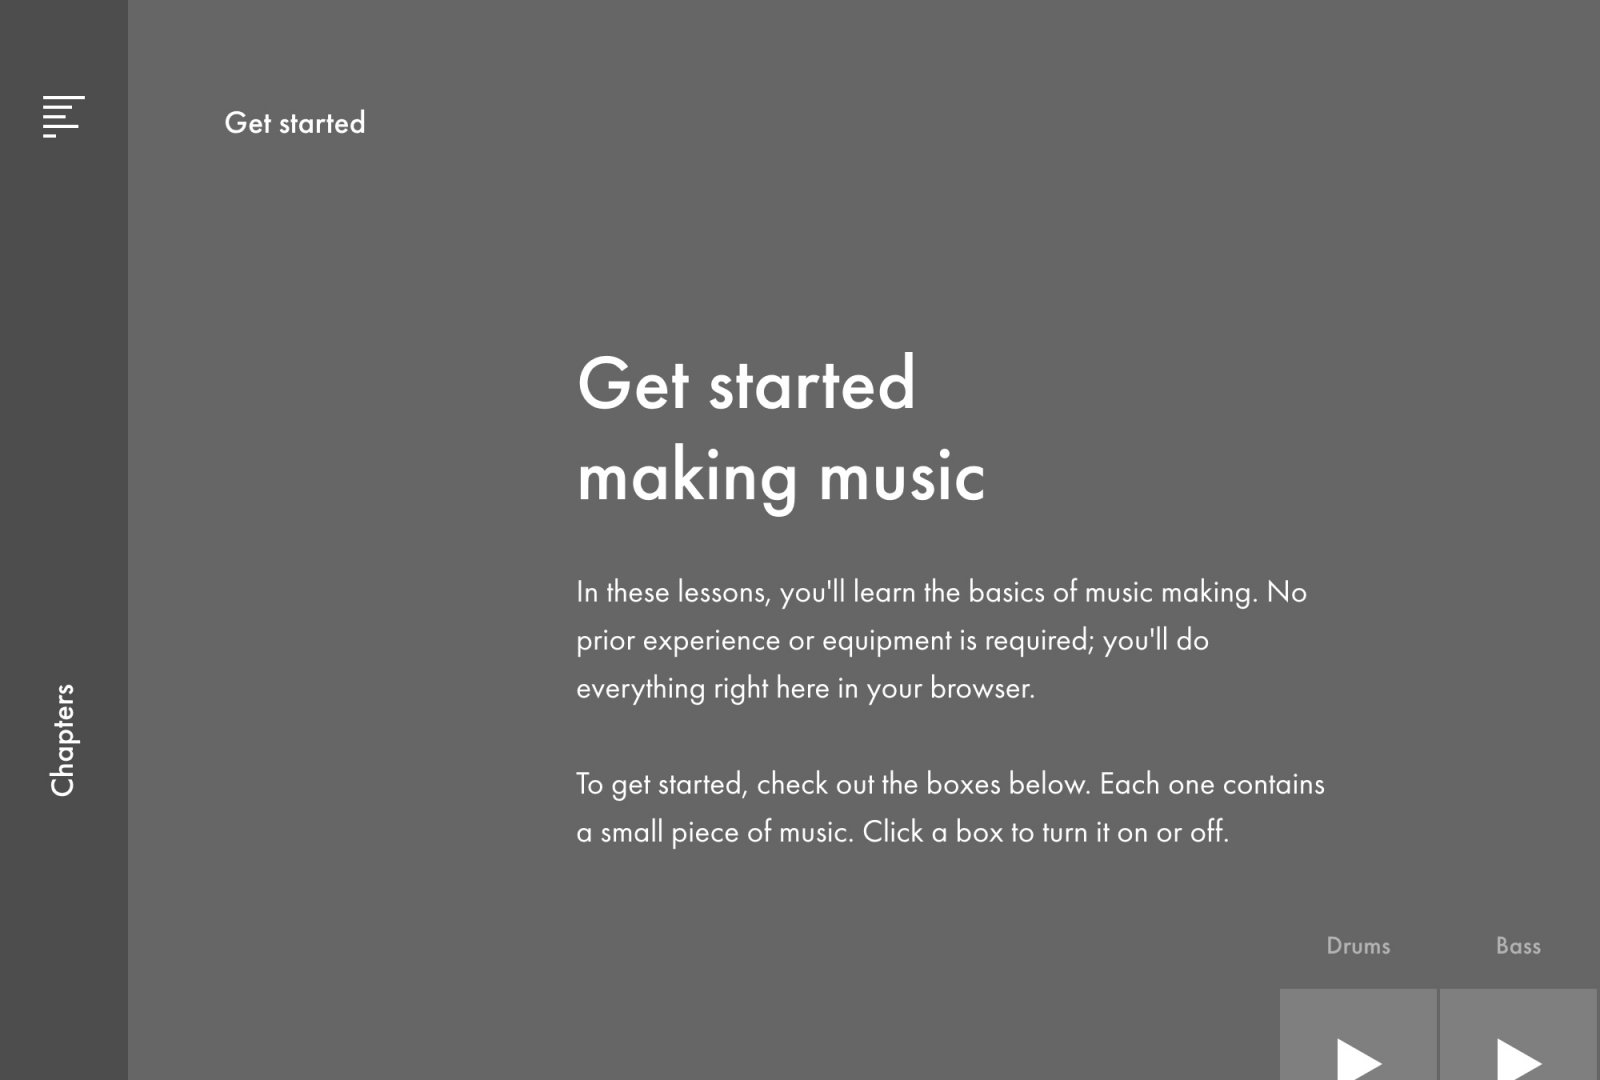 Ableton Launches Free Website Dedicated to Learning Music